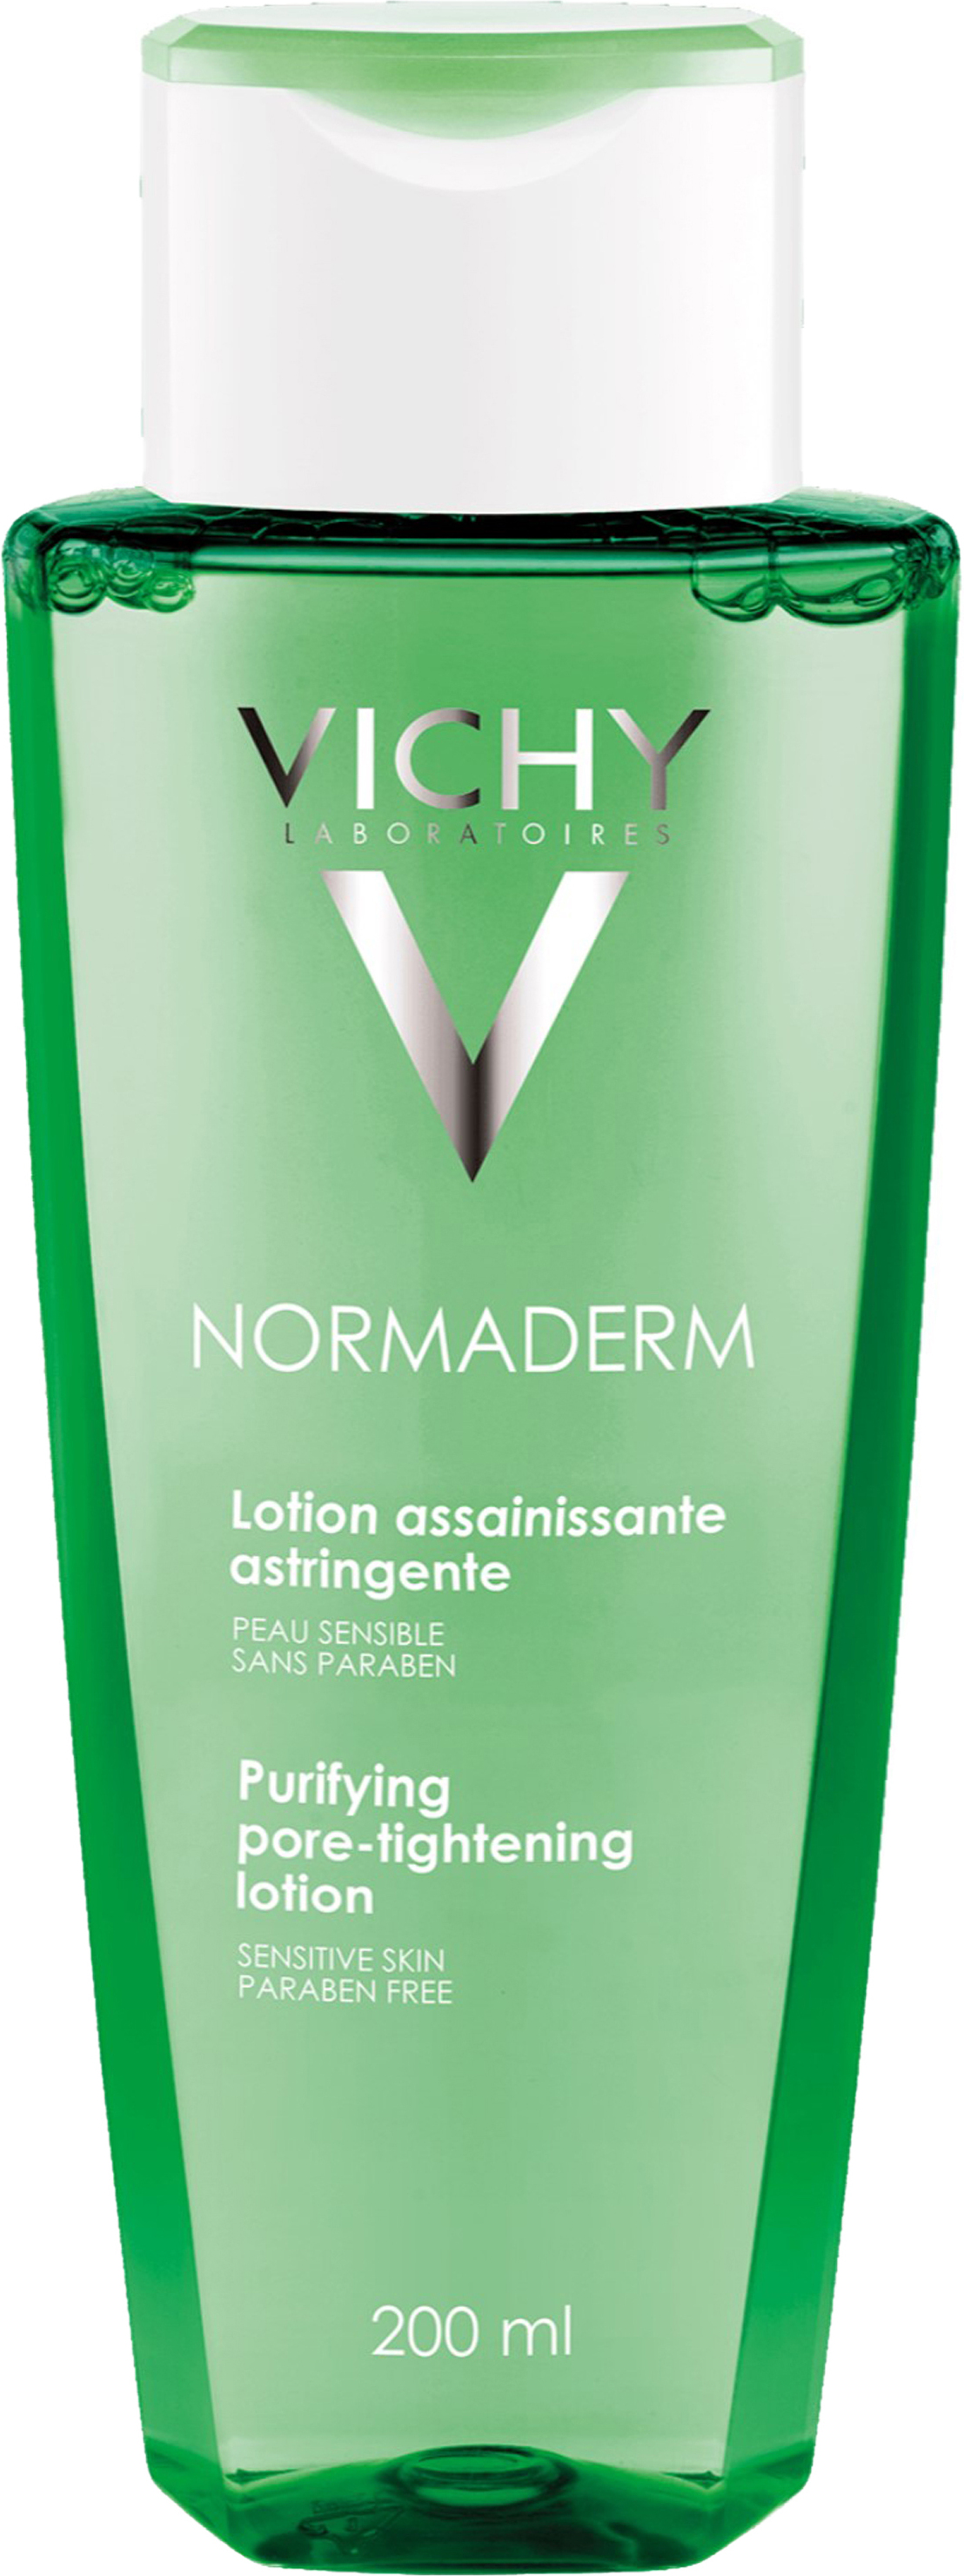 VICHY Normaderm Purifying Pore-Tightening Lotion 200 ml